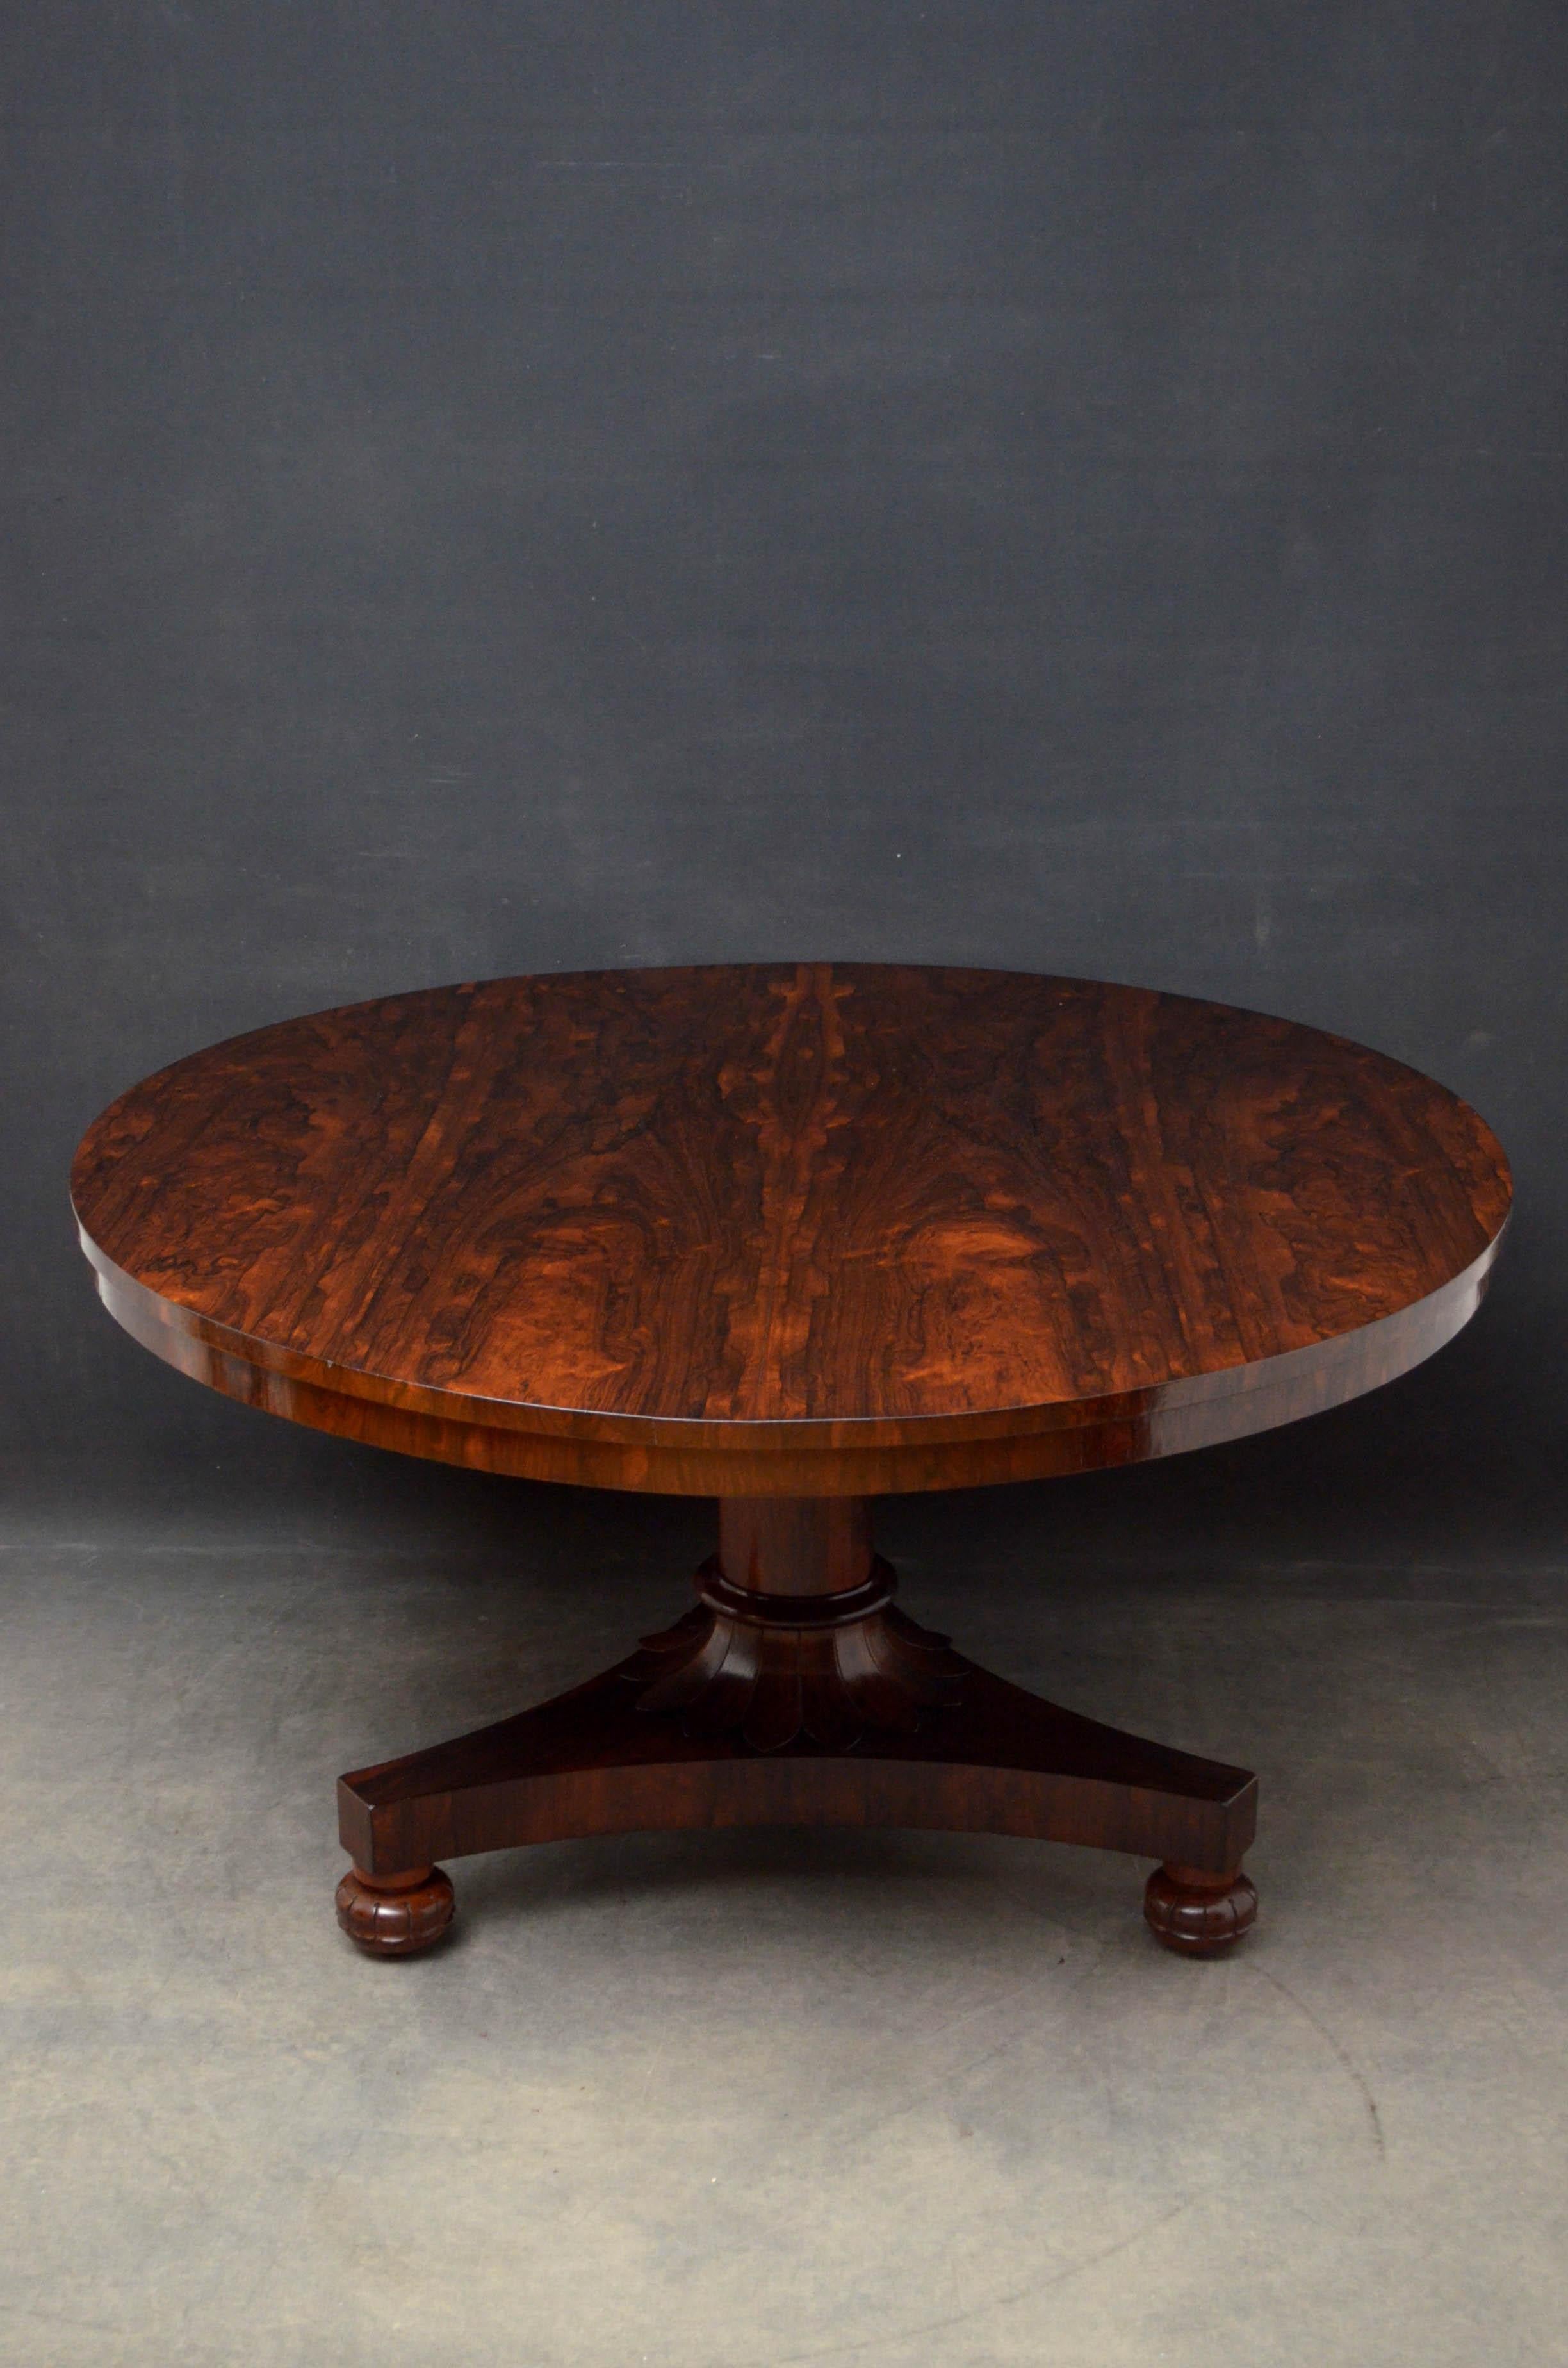 Sn4825 superb William IV rosewood, breakfast table having stunning grain to tilt top raised on tapered column terminating in petal carved collar, trefoil base and carved bun feet, standing on original brass castors. This antique dining table has